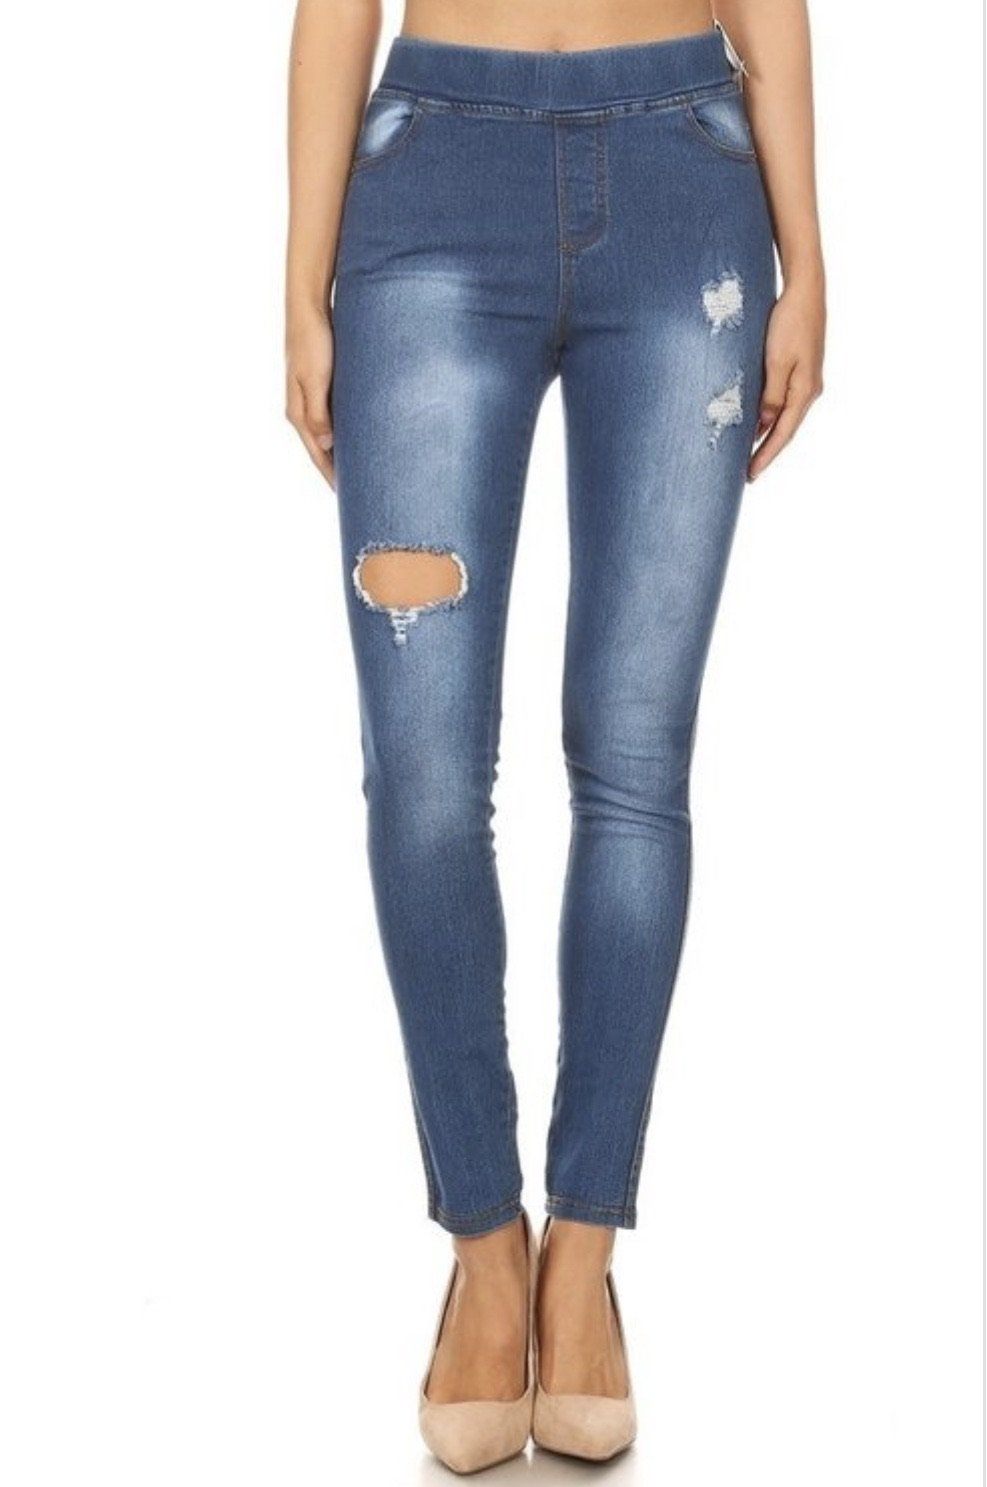 Women's Distressed Jegging Jeans Jeans MomMe and More 